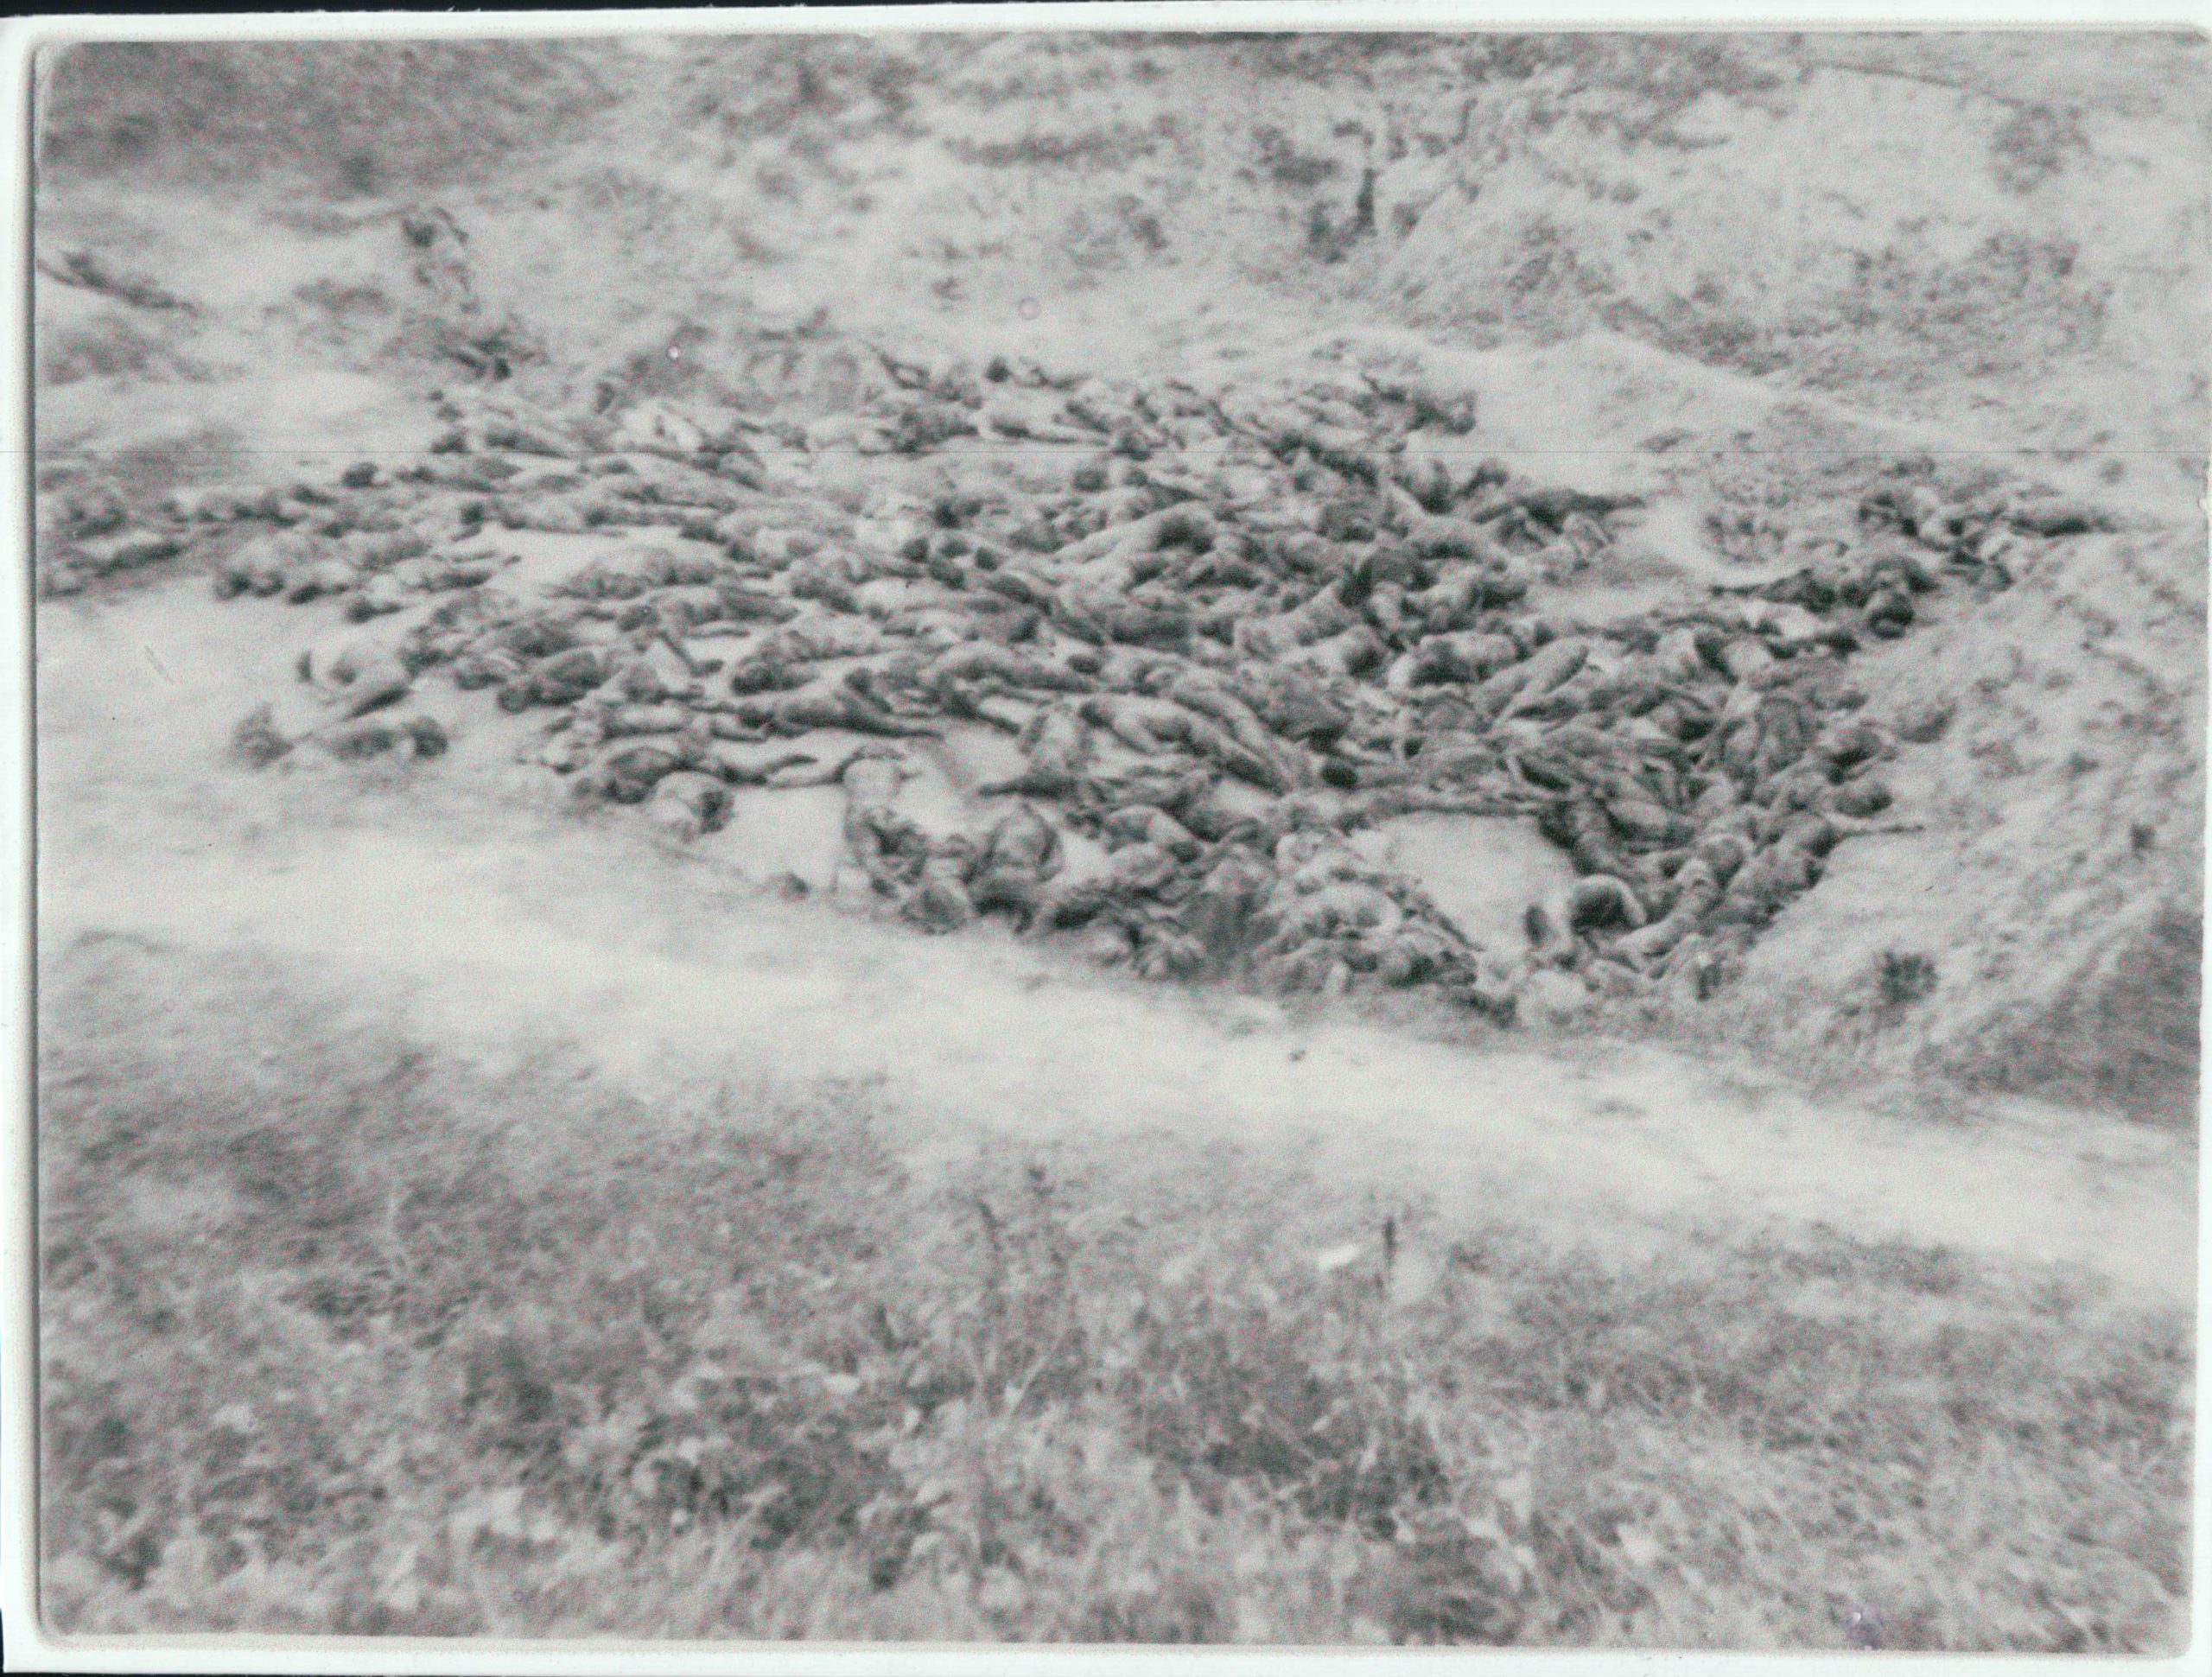 View of Mass Burial